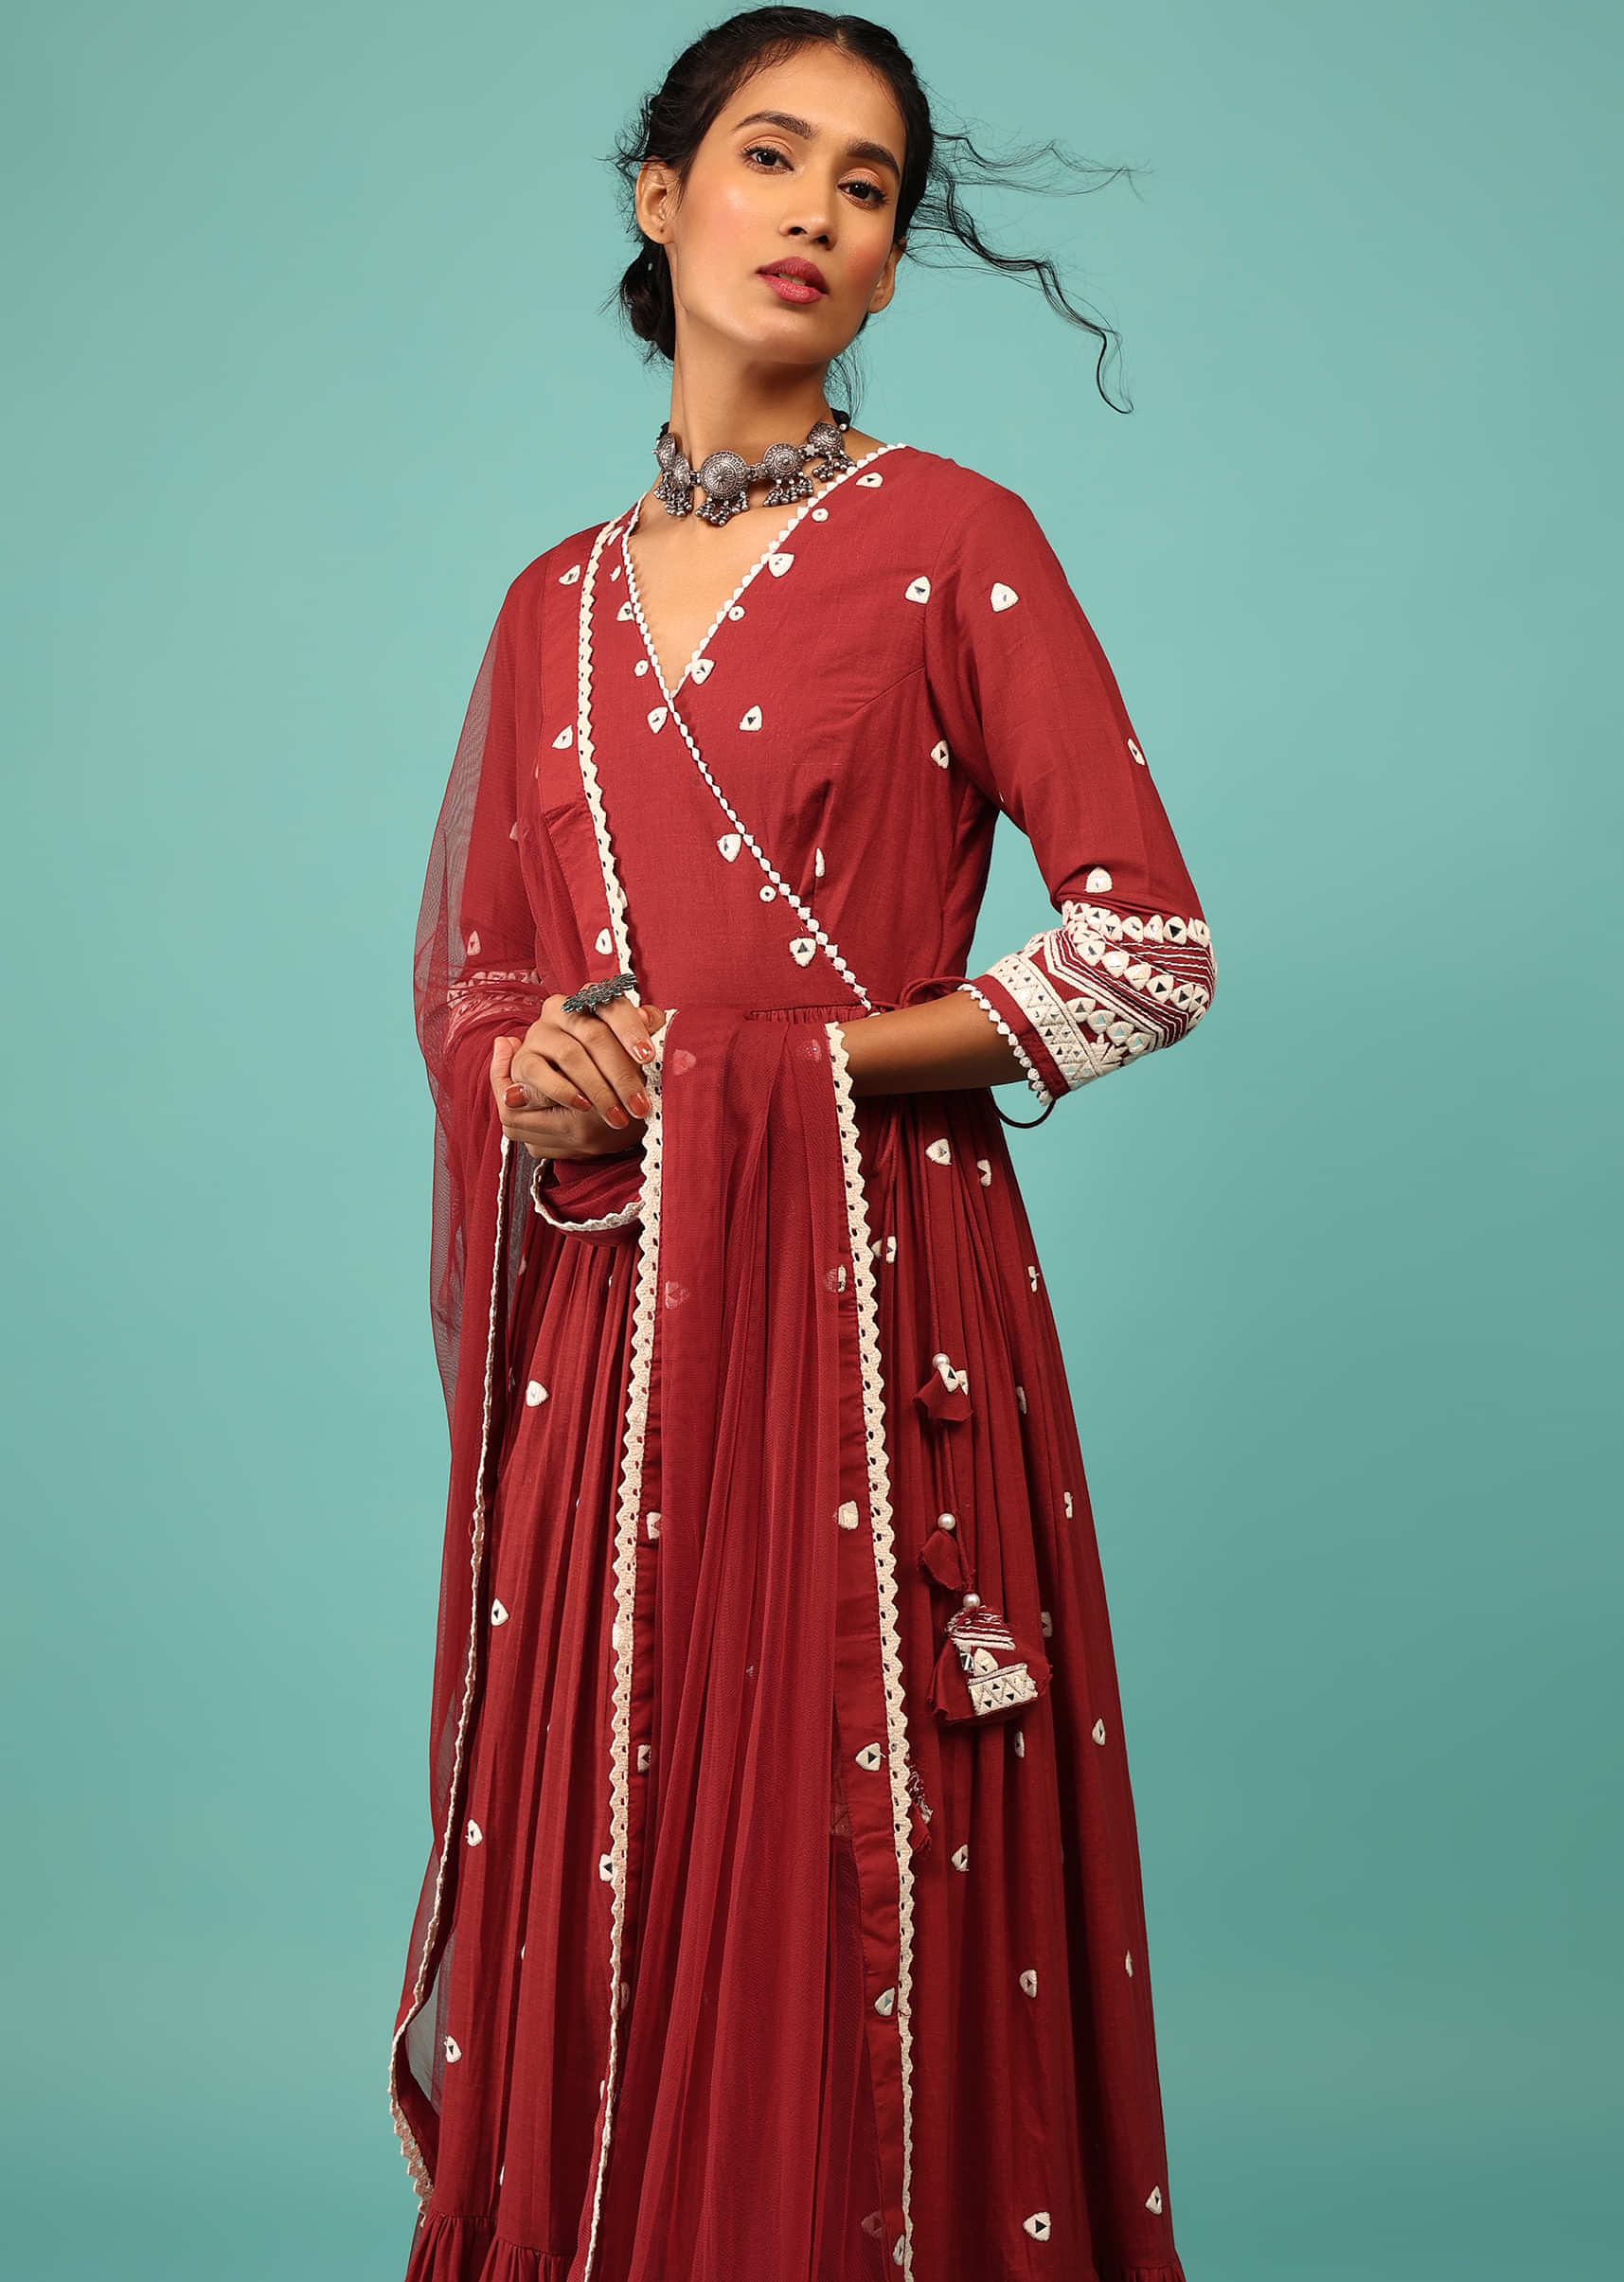 Apple Red Anarkali Kurta In Lucknowi Geometric Embroidery With Angrakha Pattern & Bottom Frill